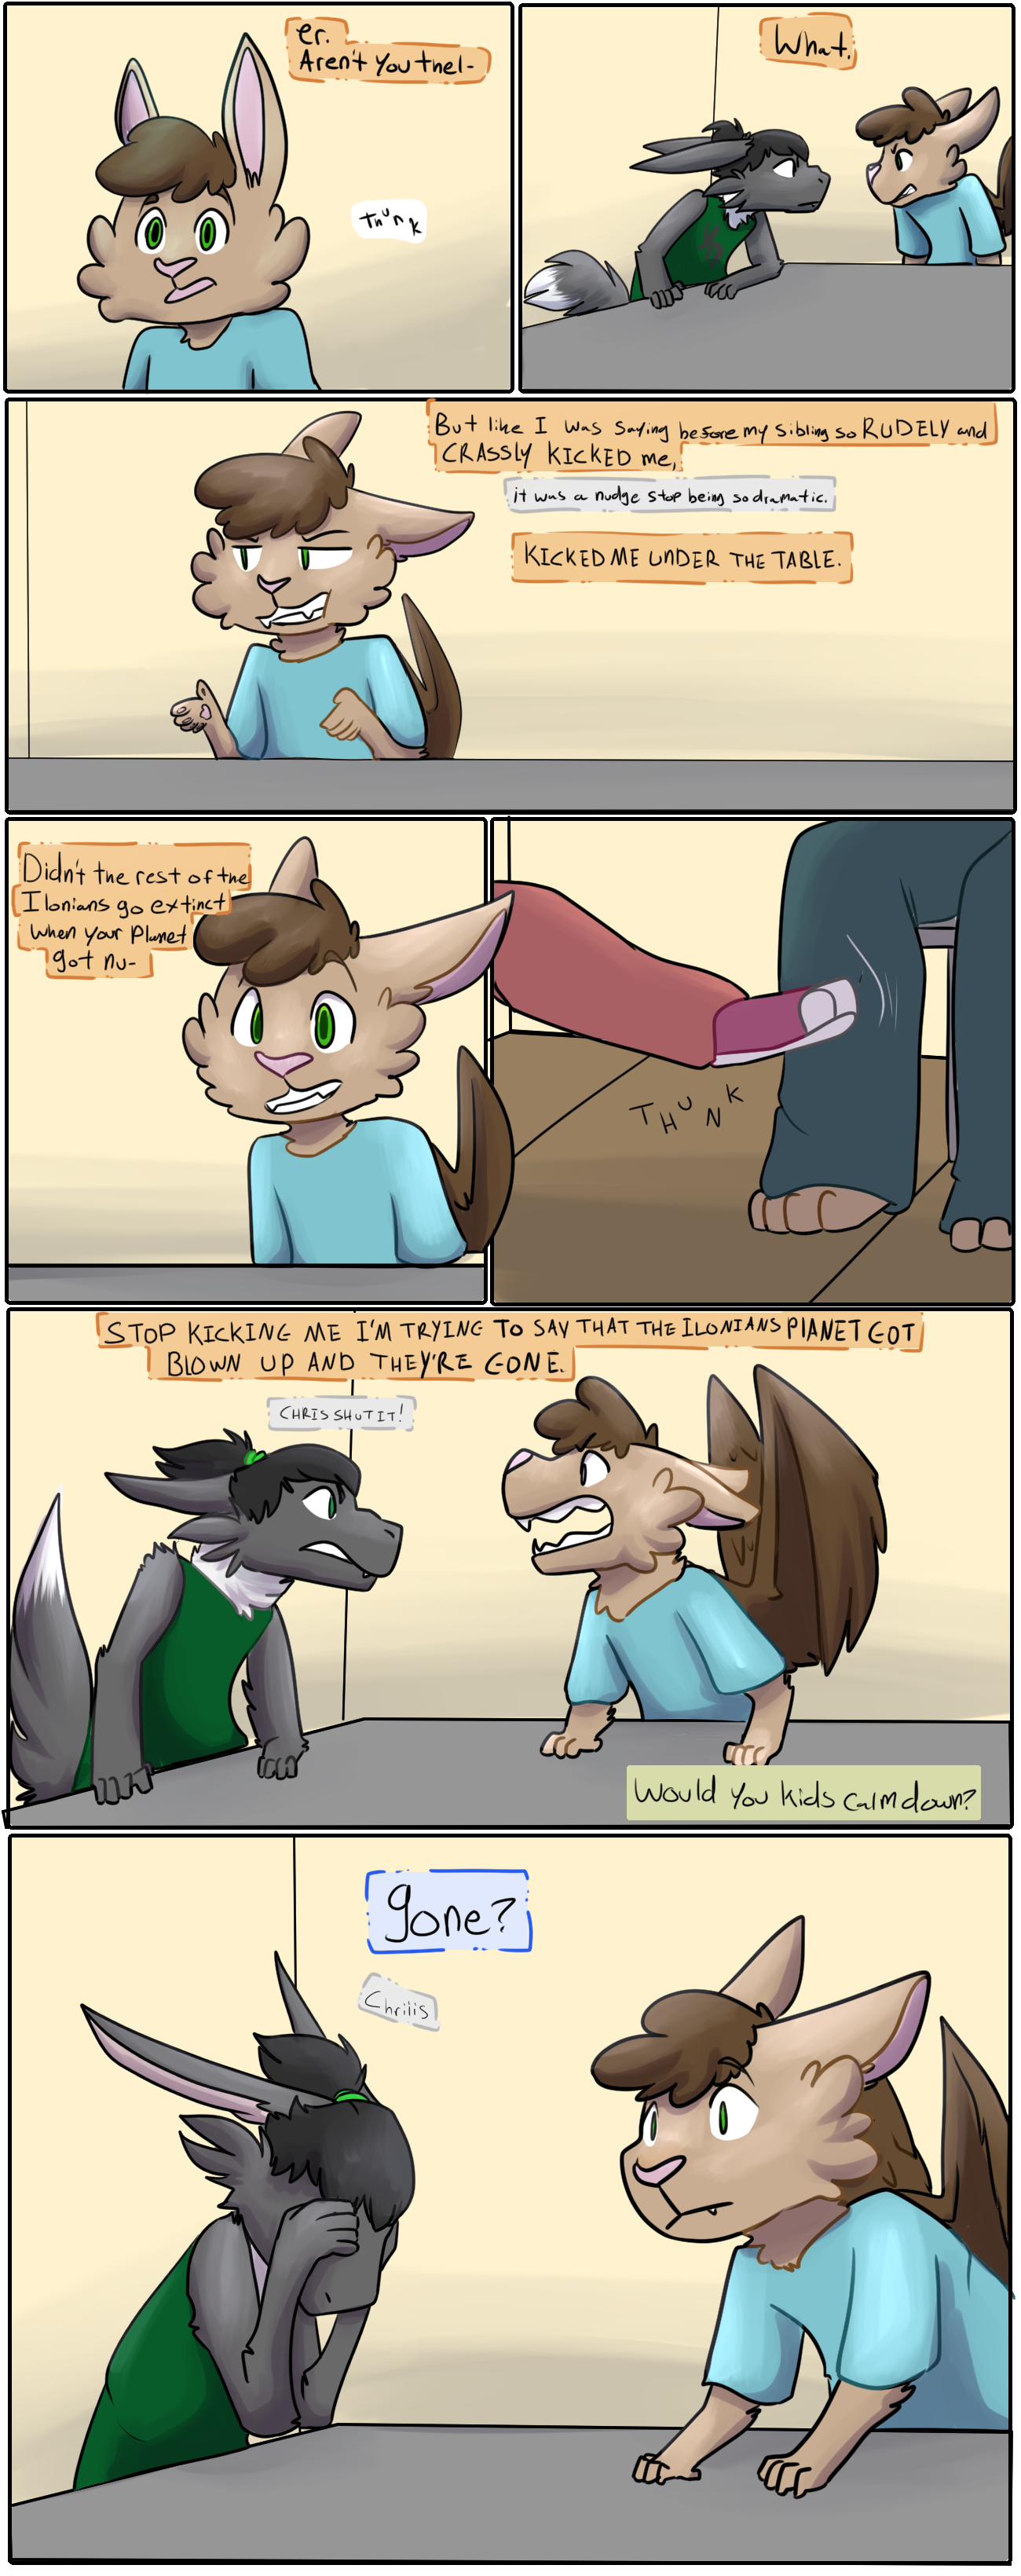 page 92 - Kicked